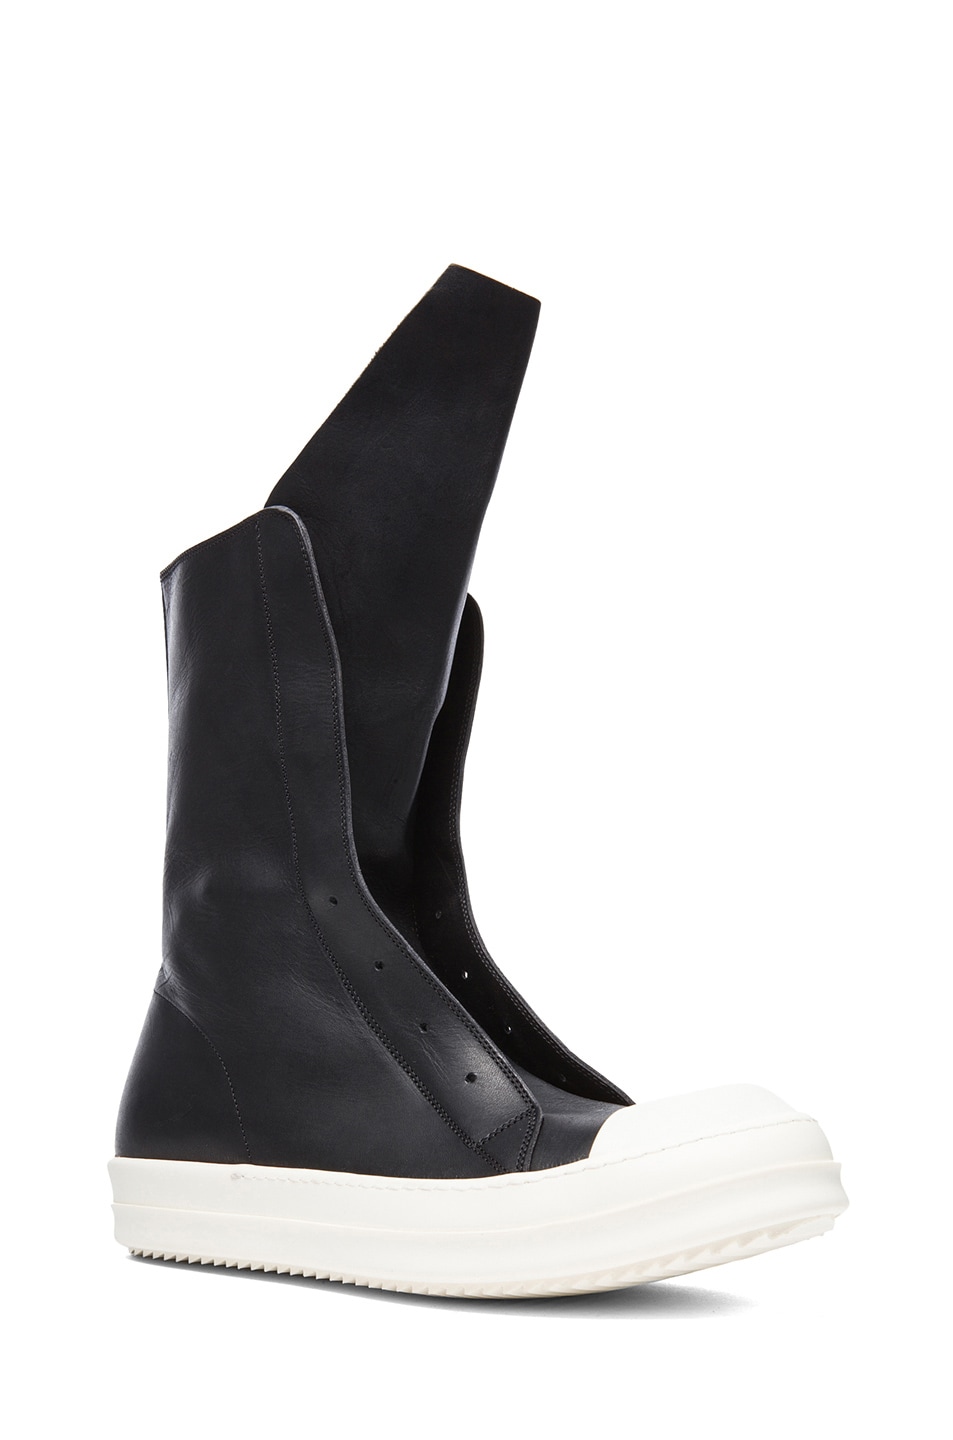 Rick Owens Leather Boots in Black | FWRD